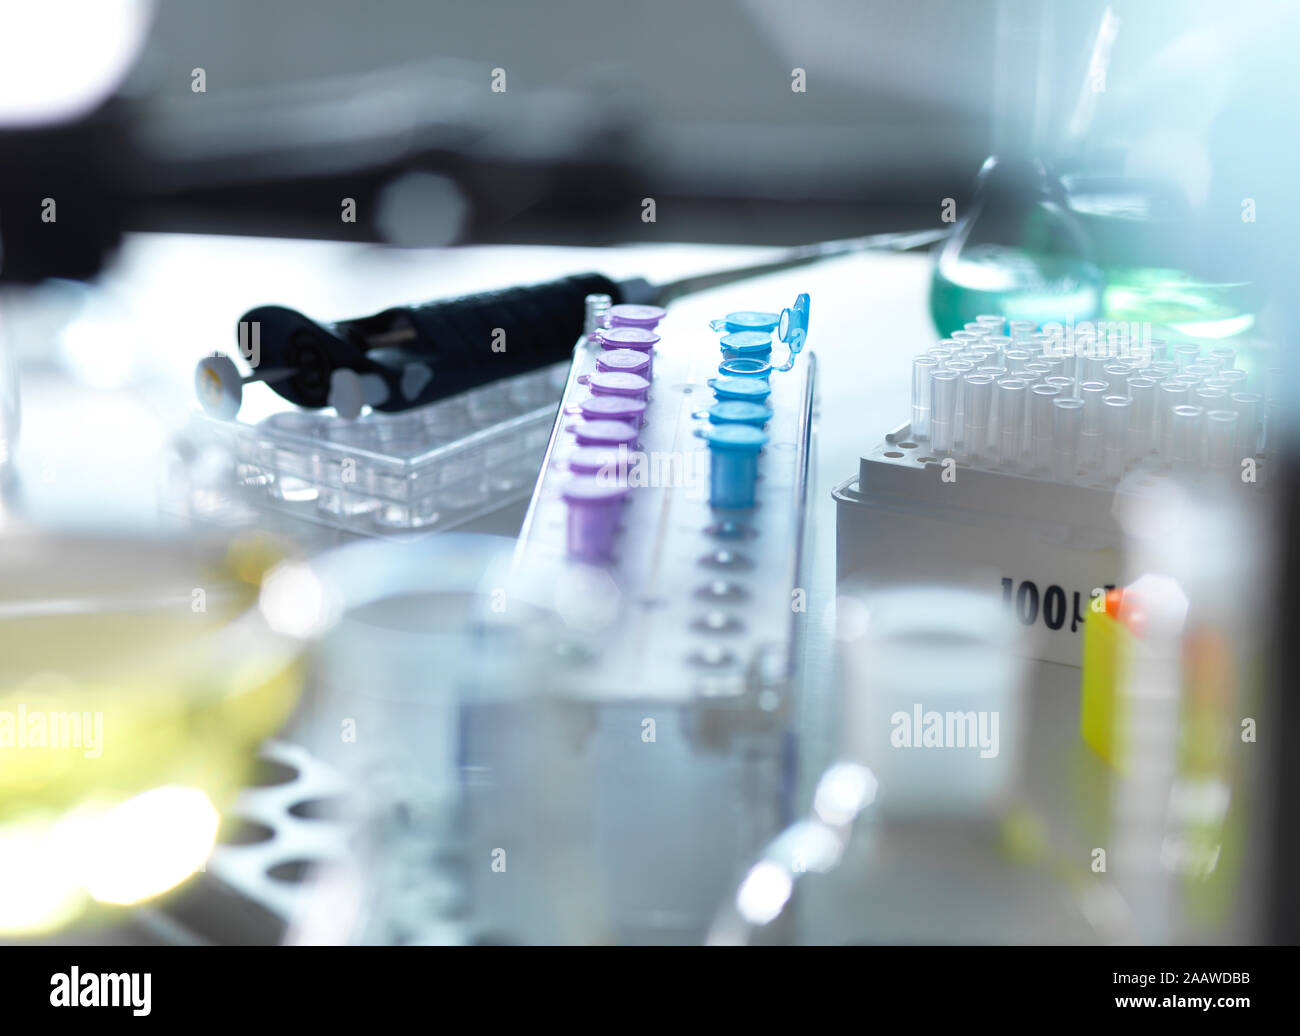 High angle view of various laboratory experiment on table Stock Photo